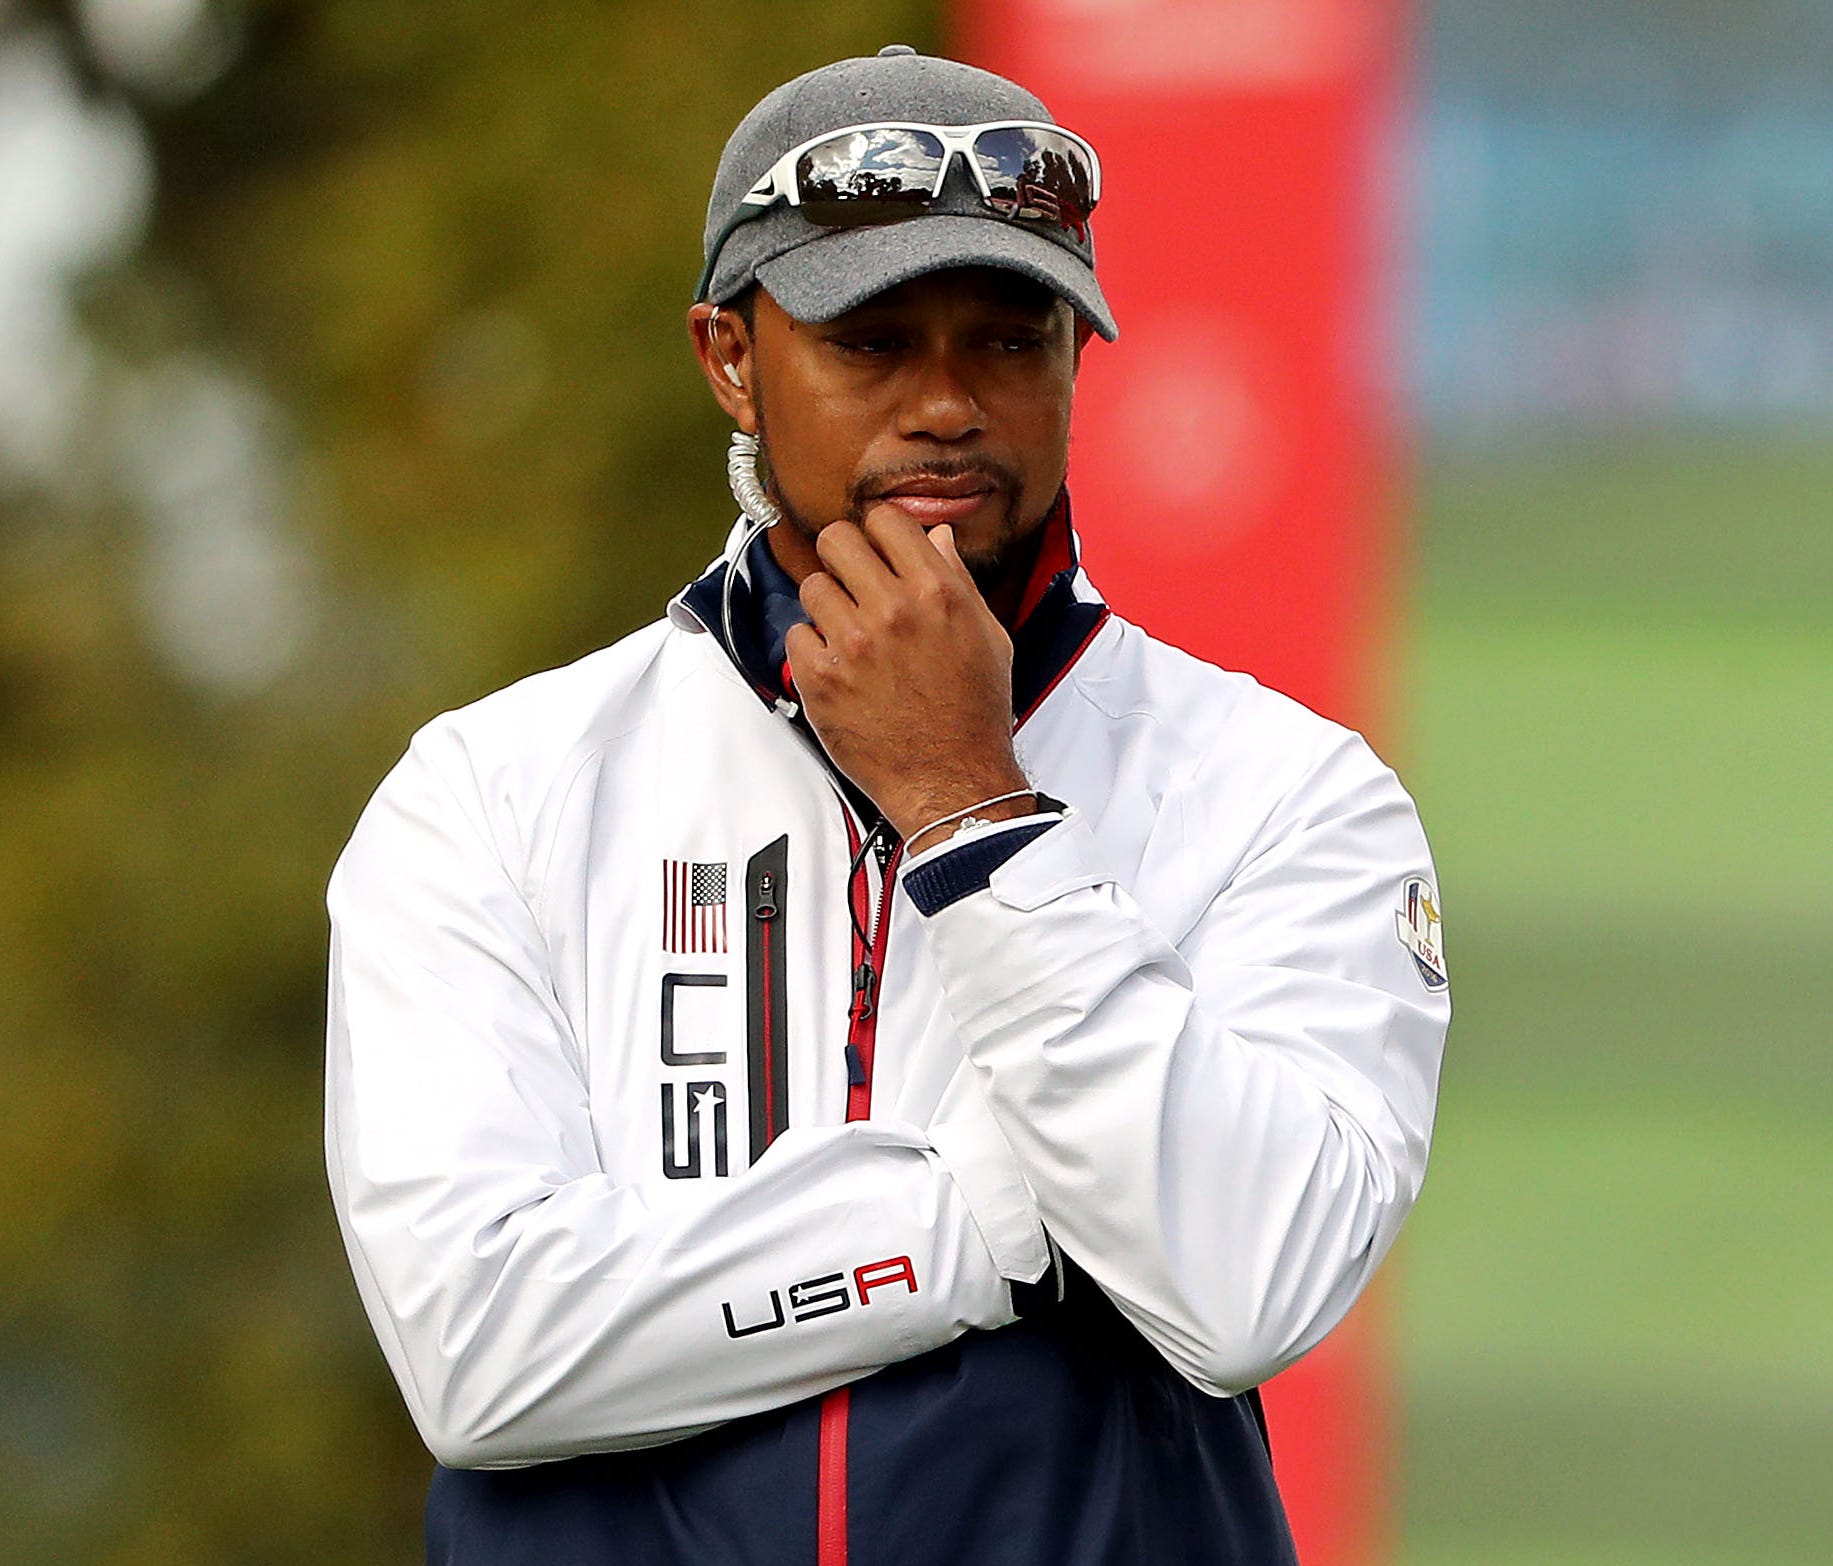 Team USA vice-captain Tiger Woods on the 12th hole during a practice round for the 41st Ryder Cup at Hazeltine National Golf Club.